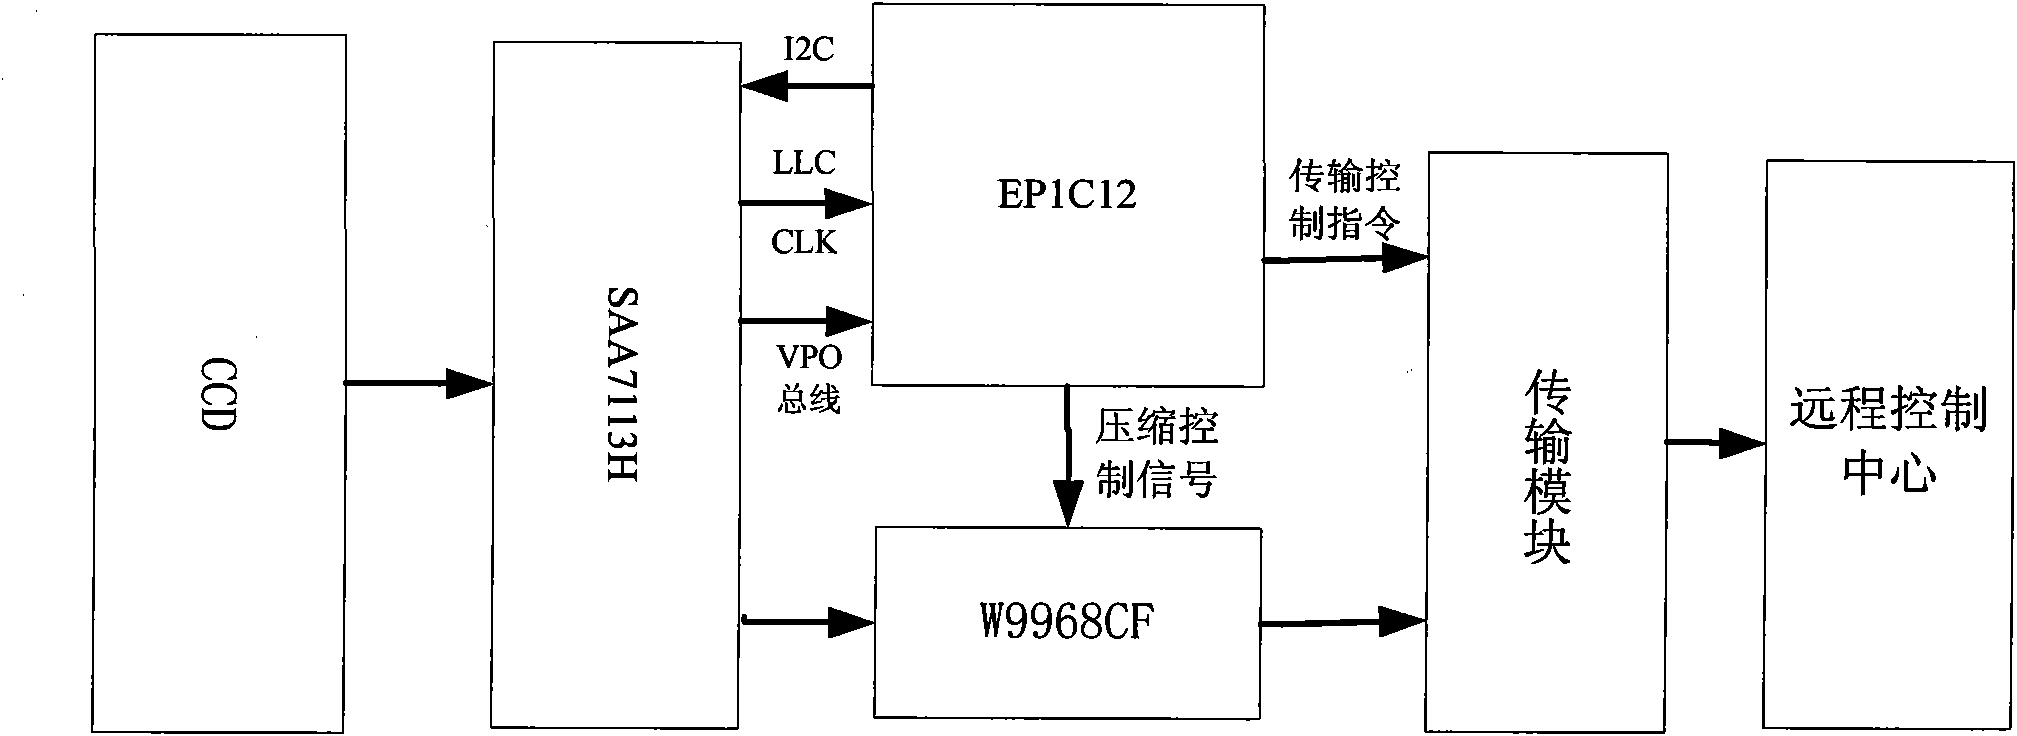 System for automatically monitoring illegally-parking vehicles and compressed transmission based on field programmable gate array (FPGA)